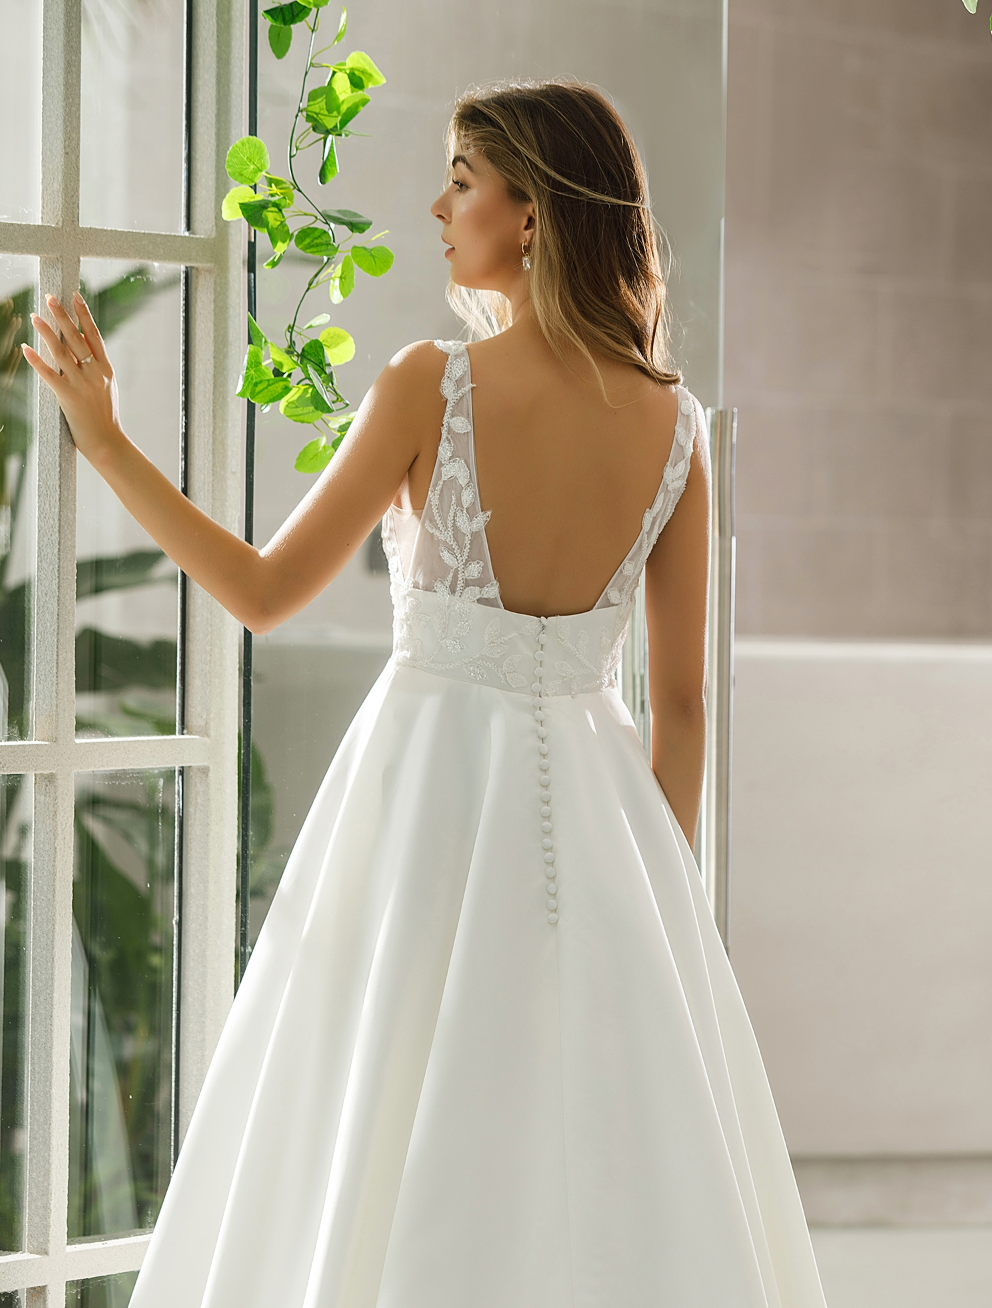 Load image into Gallery viewer, Illusion Bodice Satin A-line Bridal Gown With Pockets
